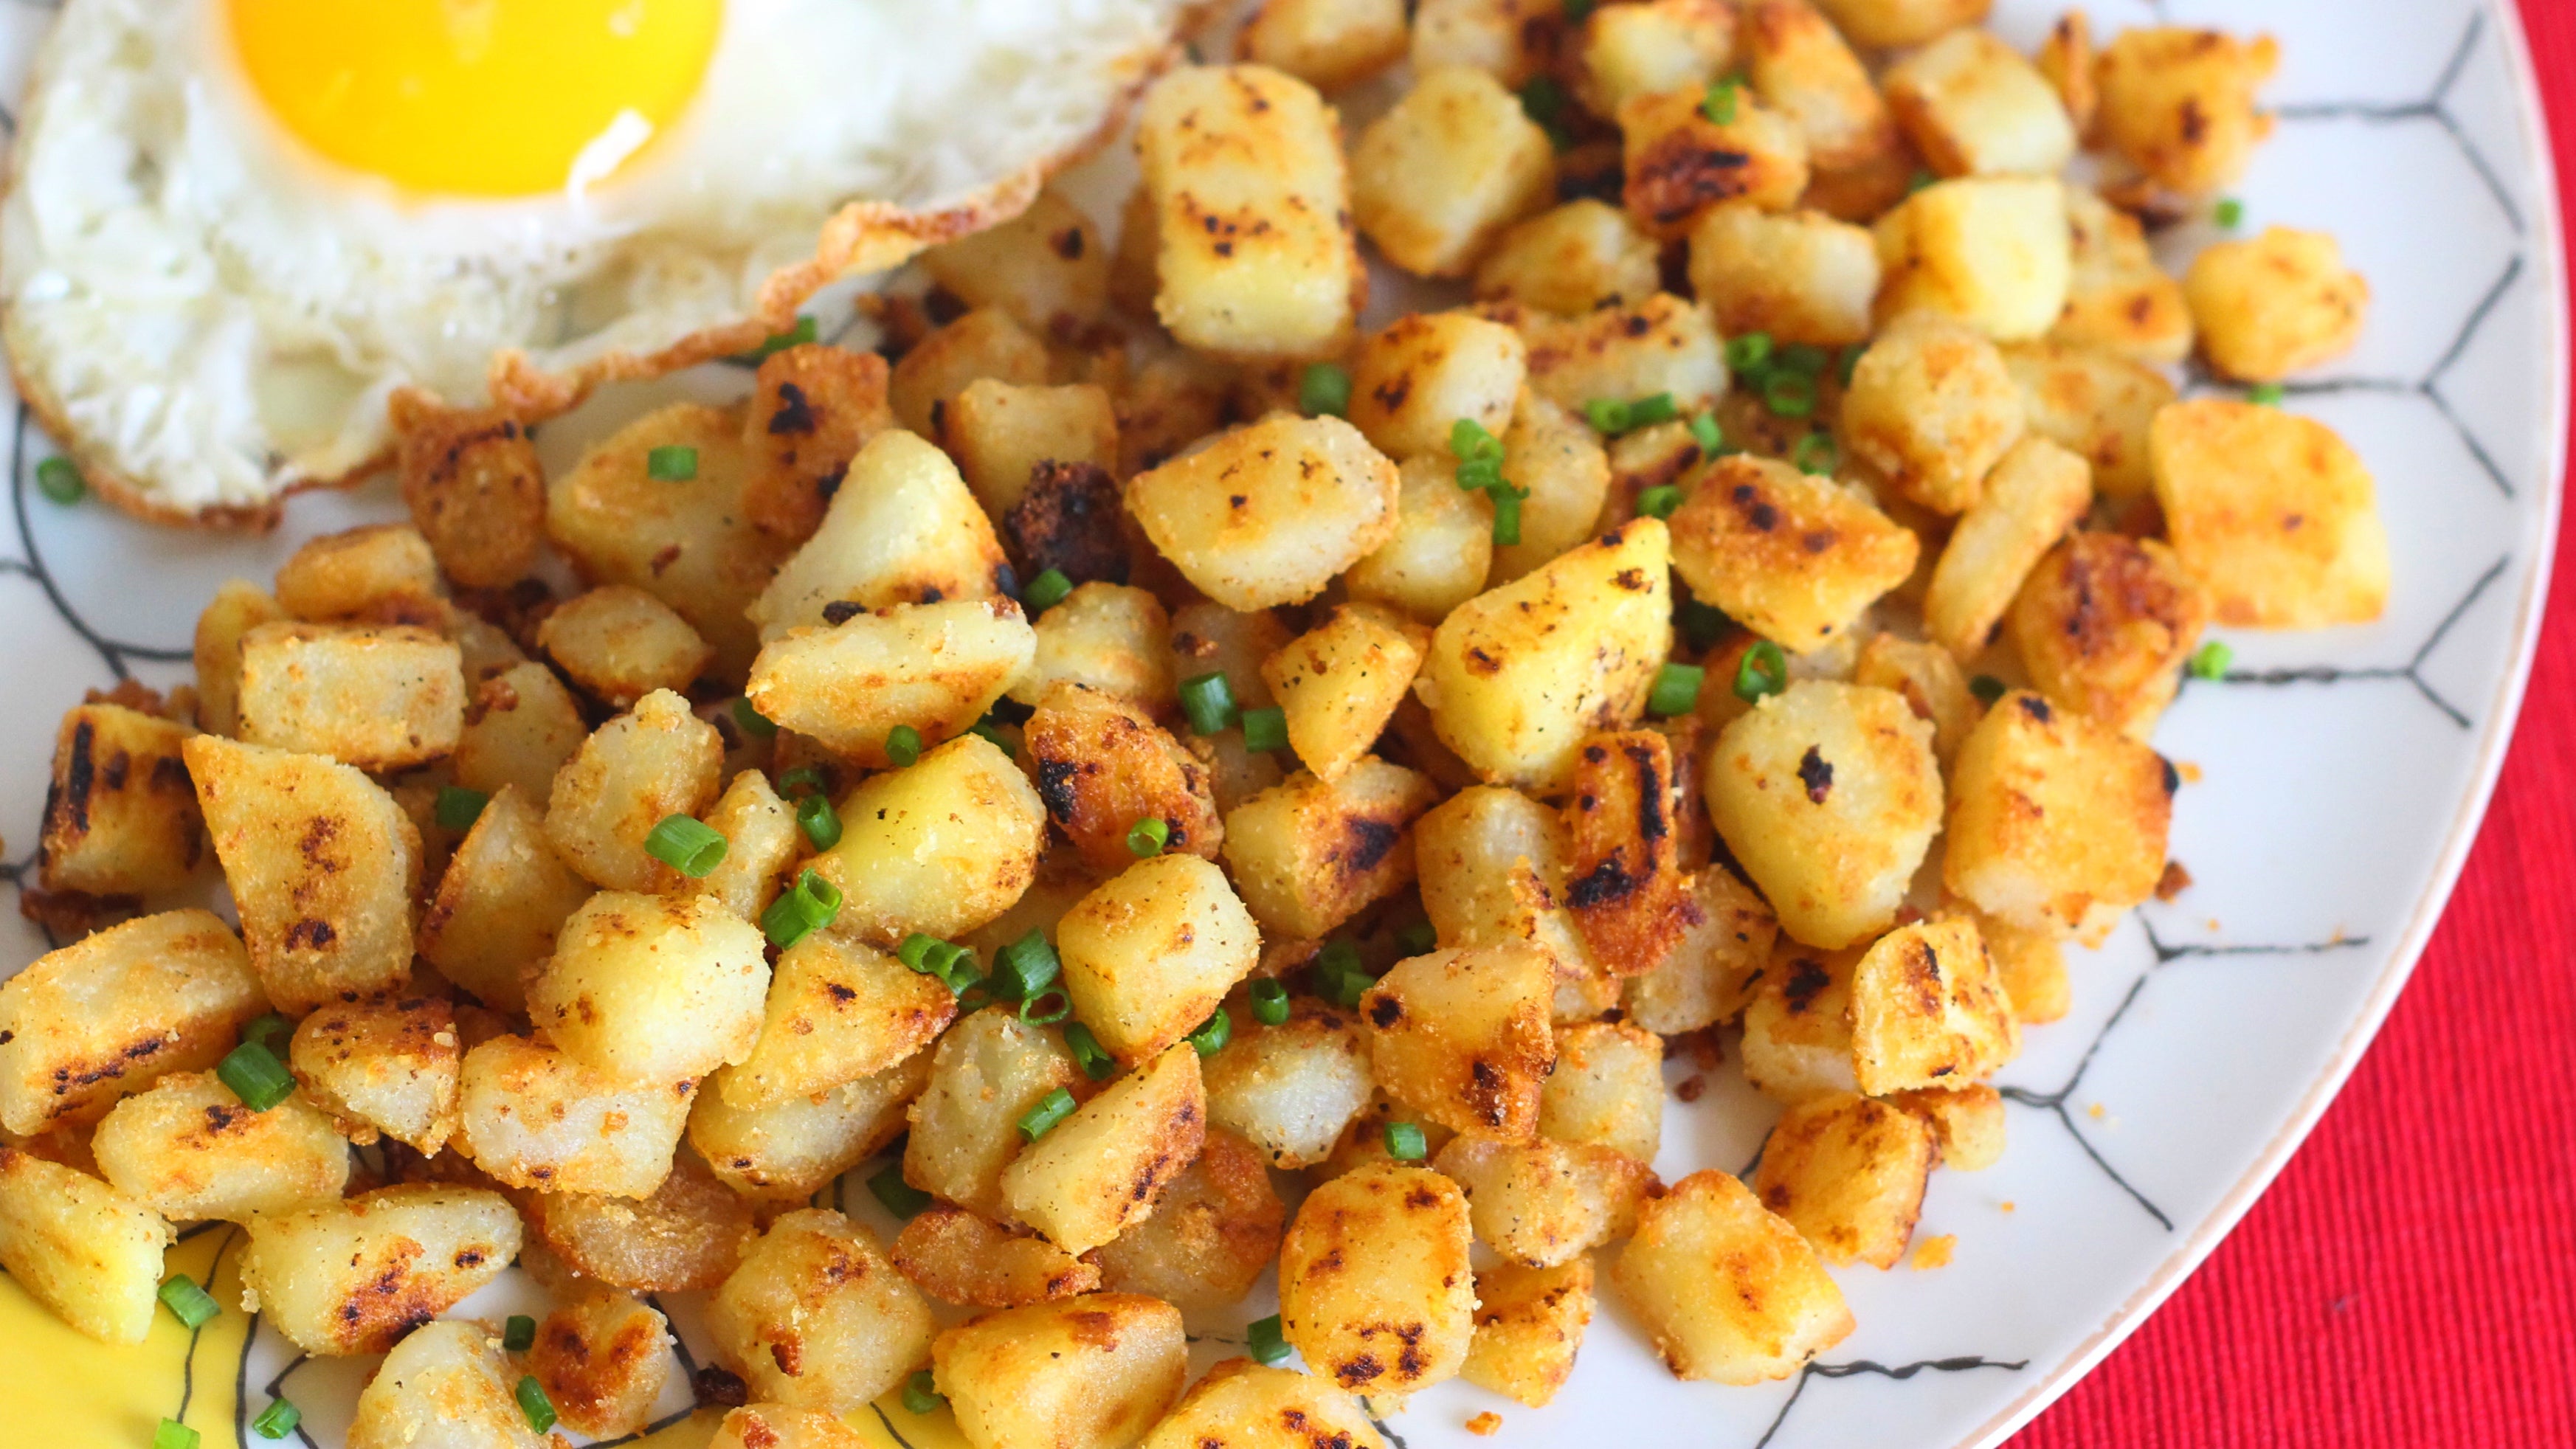 How To Make Your Home Fries Extra Crispy